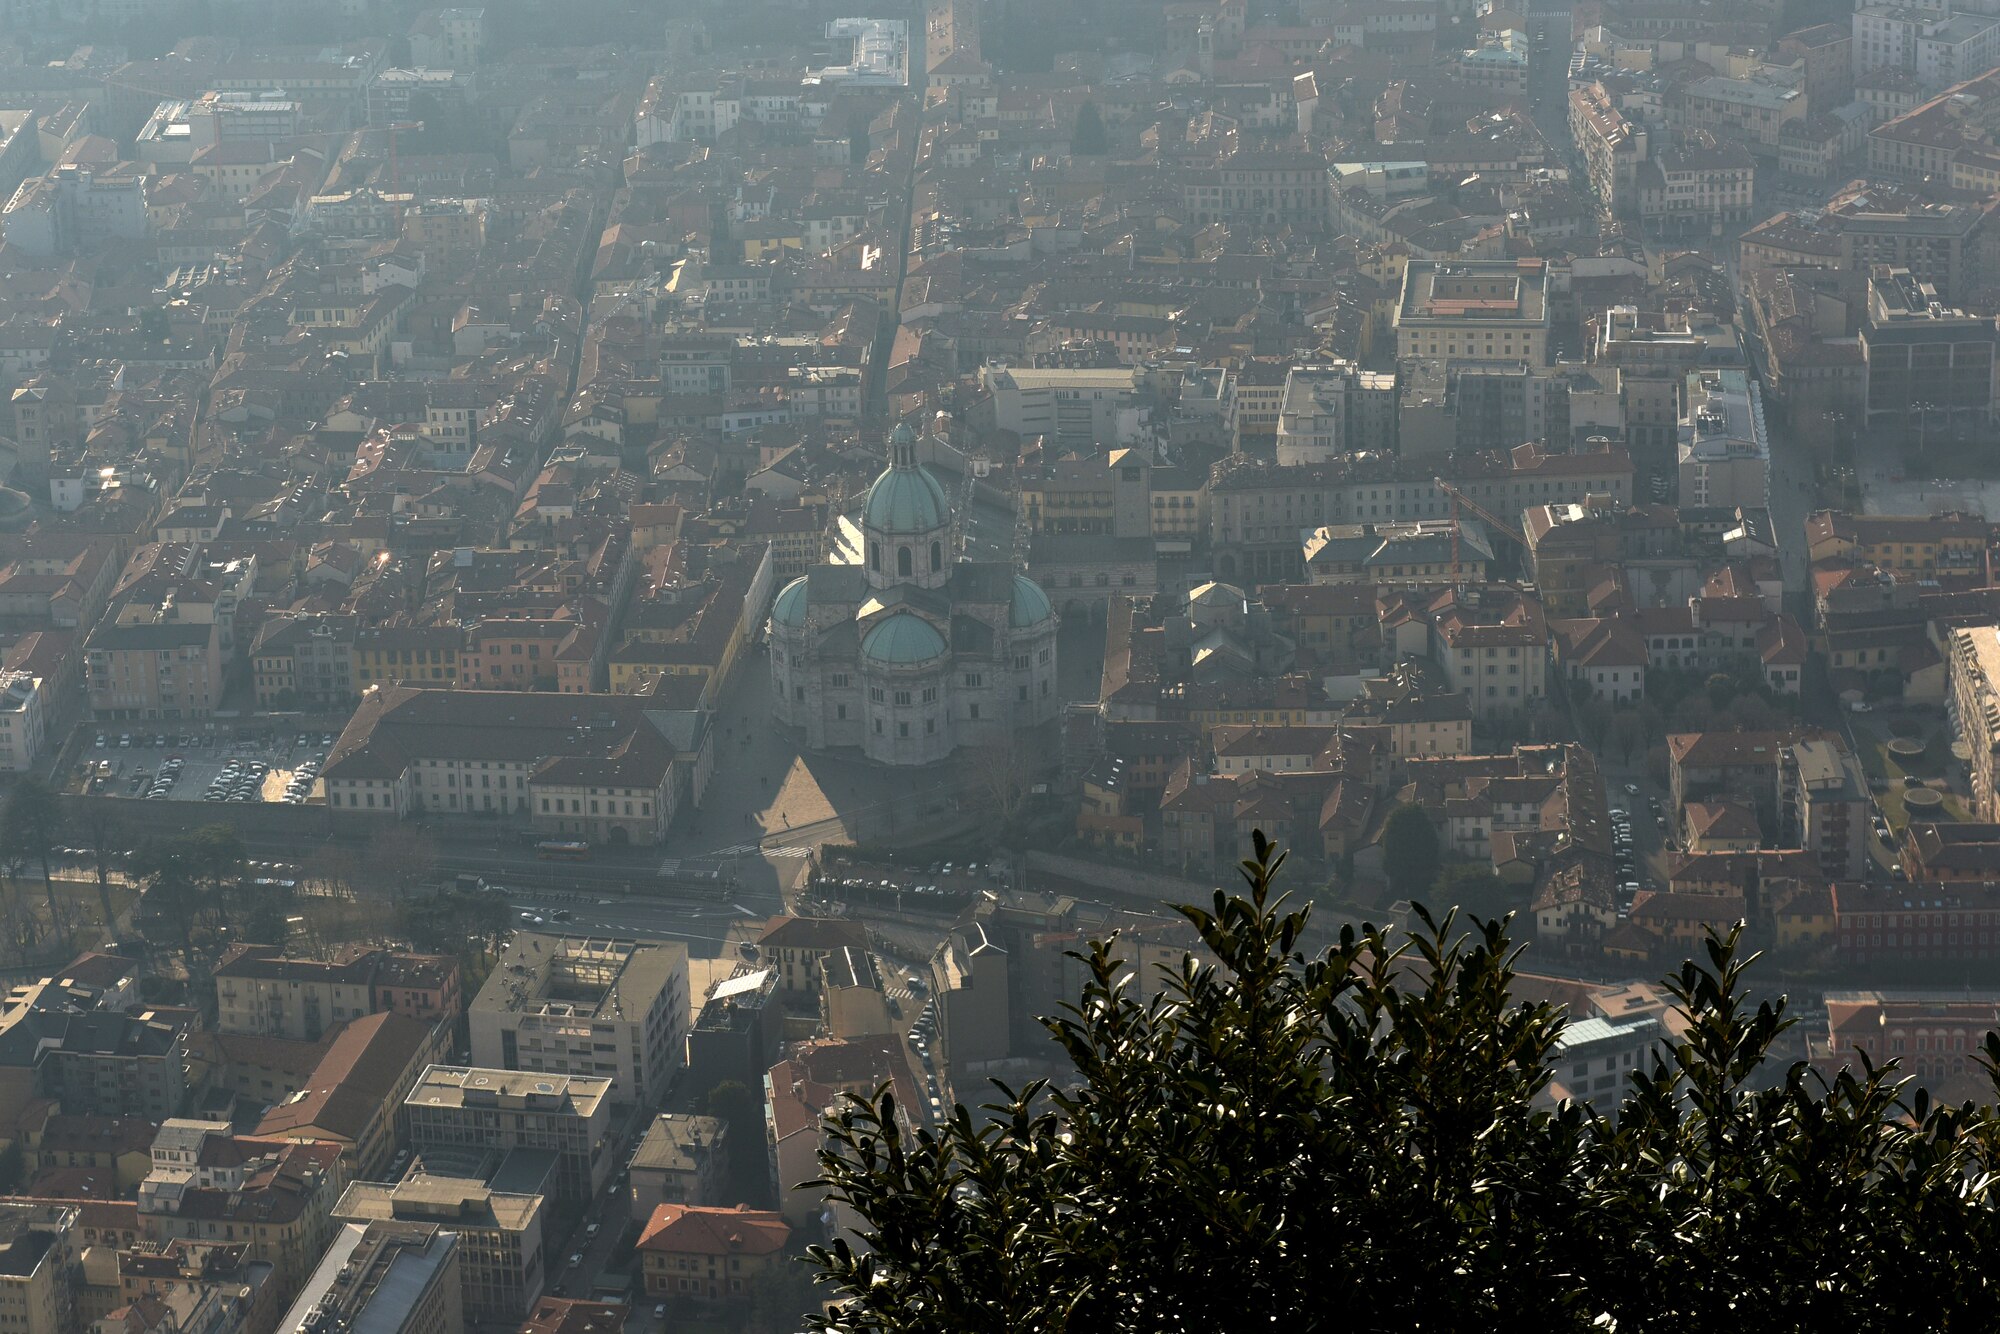 The Cathedral of Como can be seen in the center of the city, Jan. 20, 2019. The church is a Roman Catholic cathedral and is dedicated to the Assumption of the Blessed Virgin Mary. (U.S. Air Force photo by Airman 1st Class Madeline Herzog)